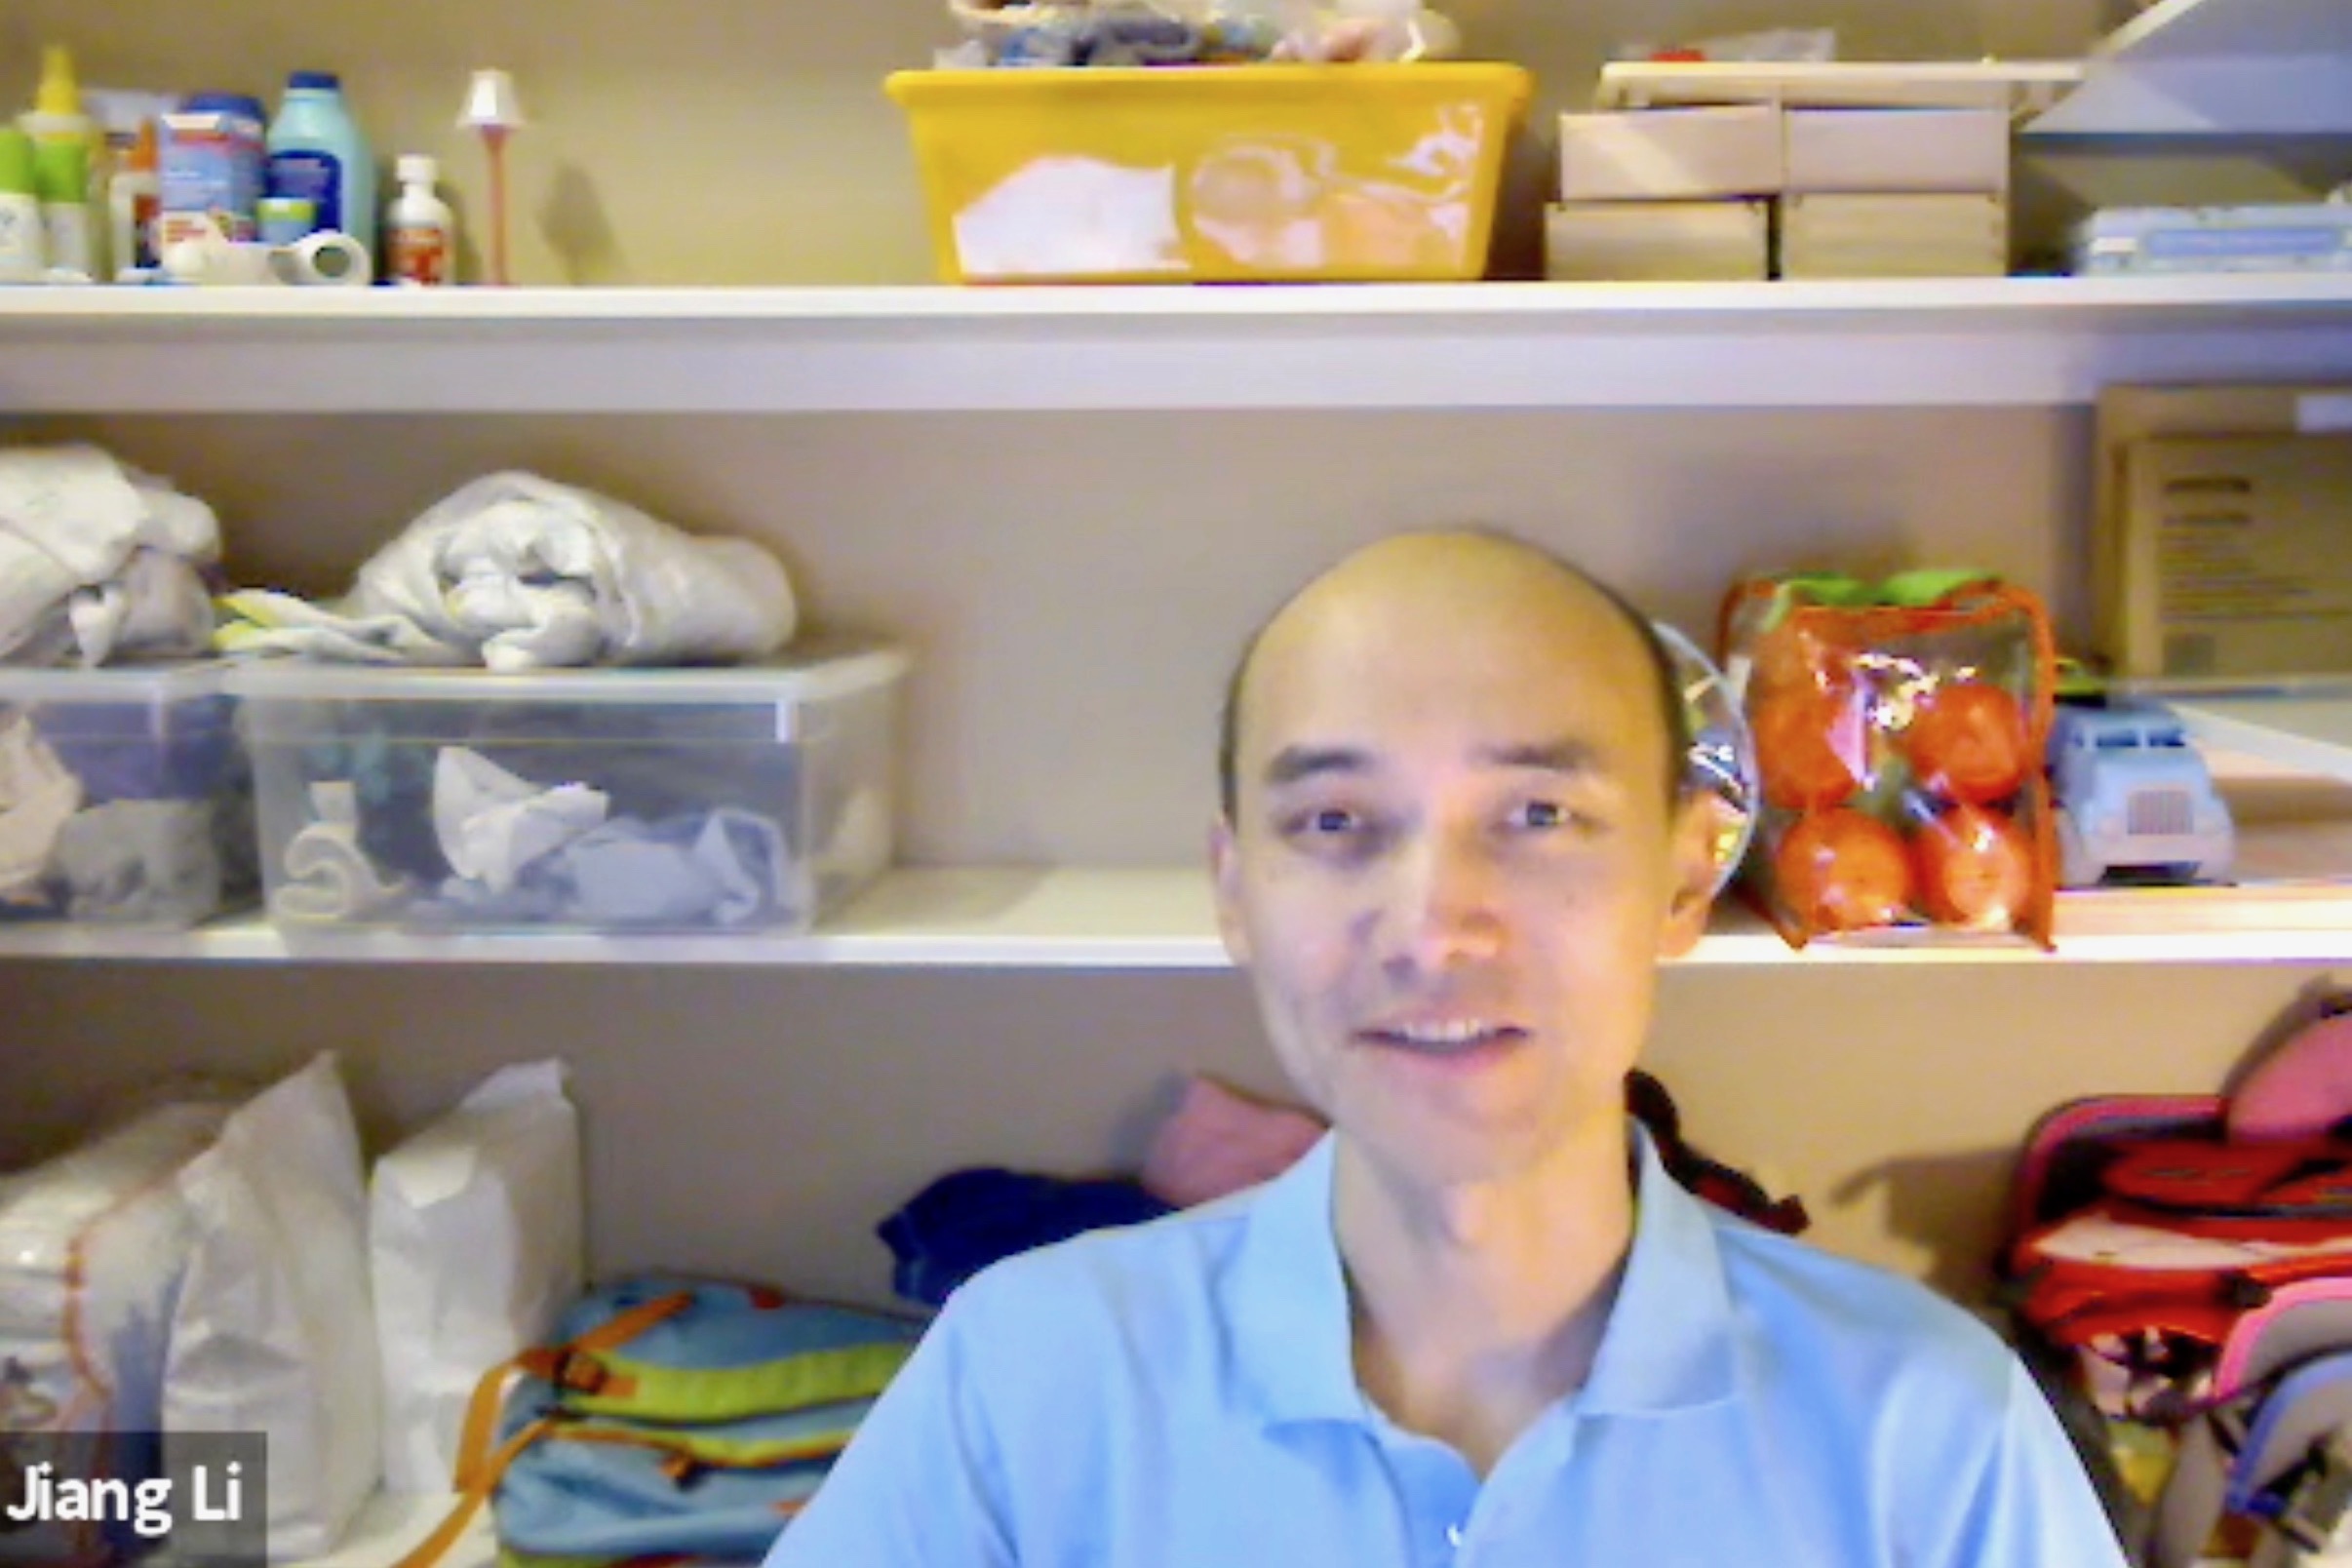 Dr. Jiang Li talks on Zoom from one of the closets at his house.